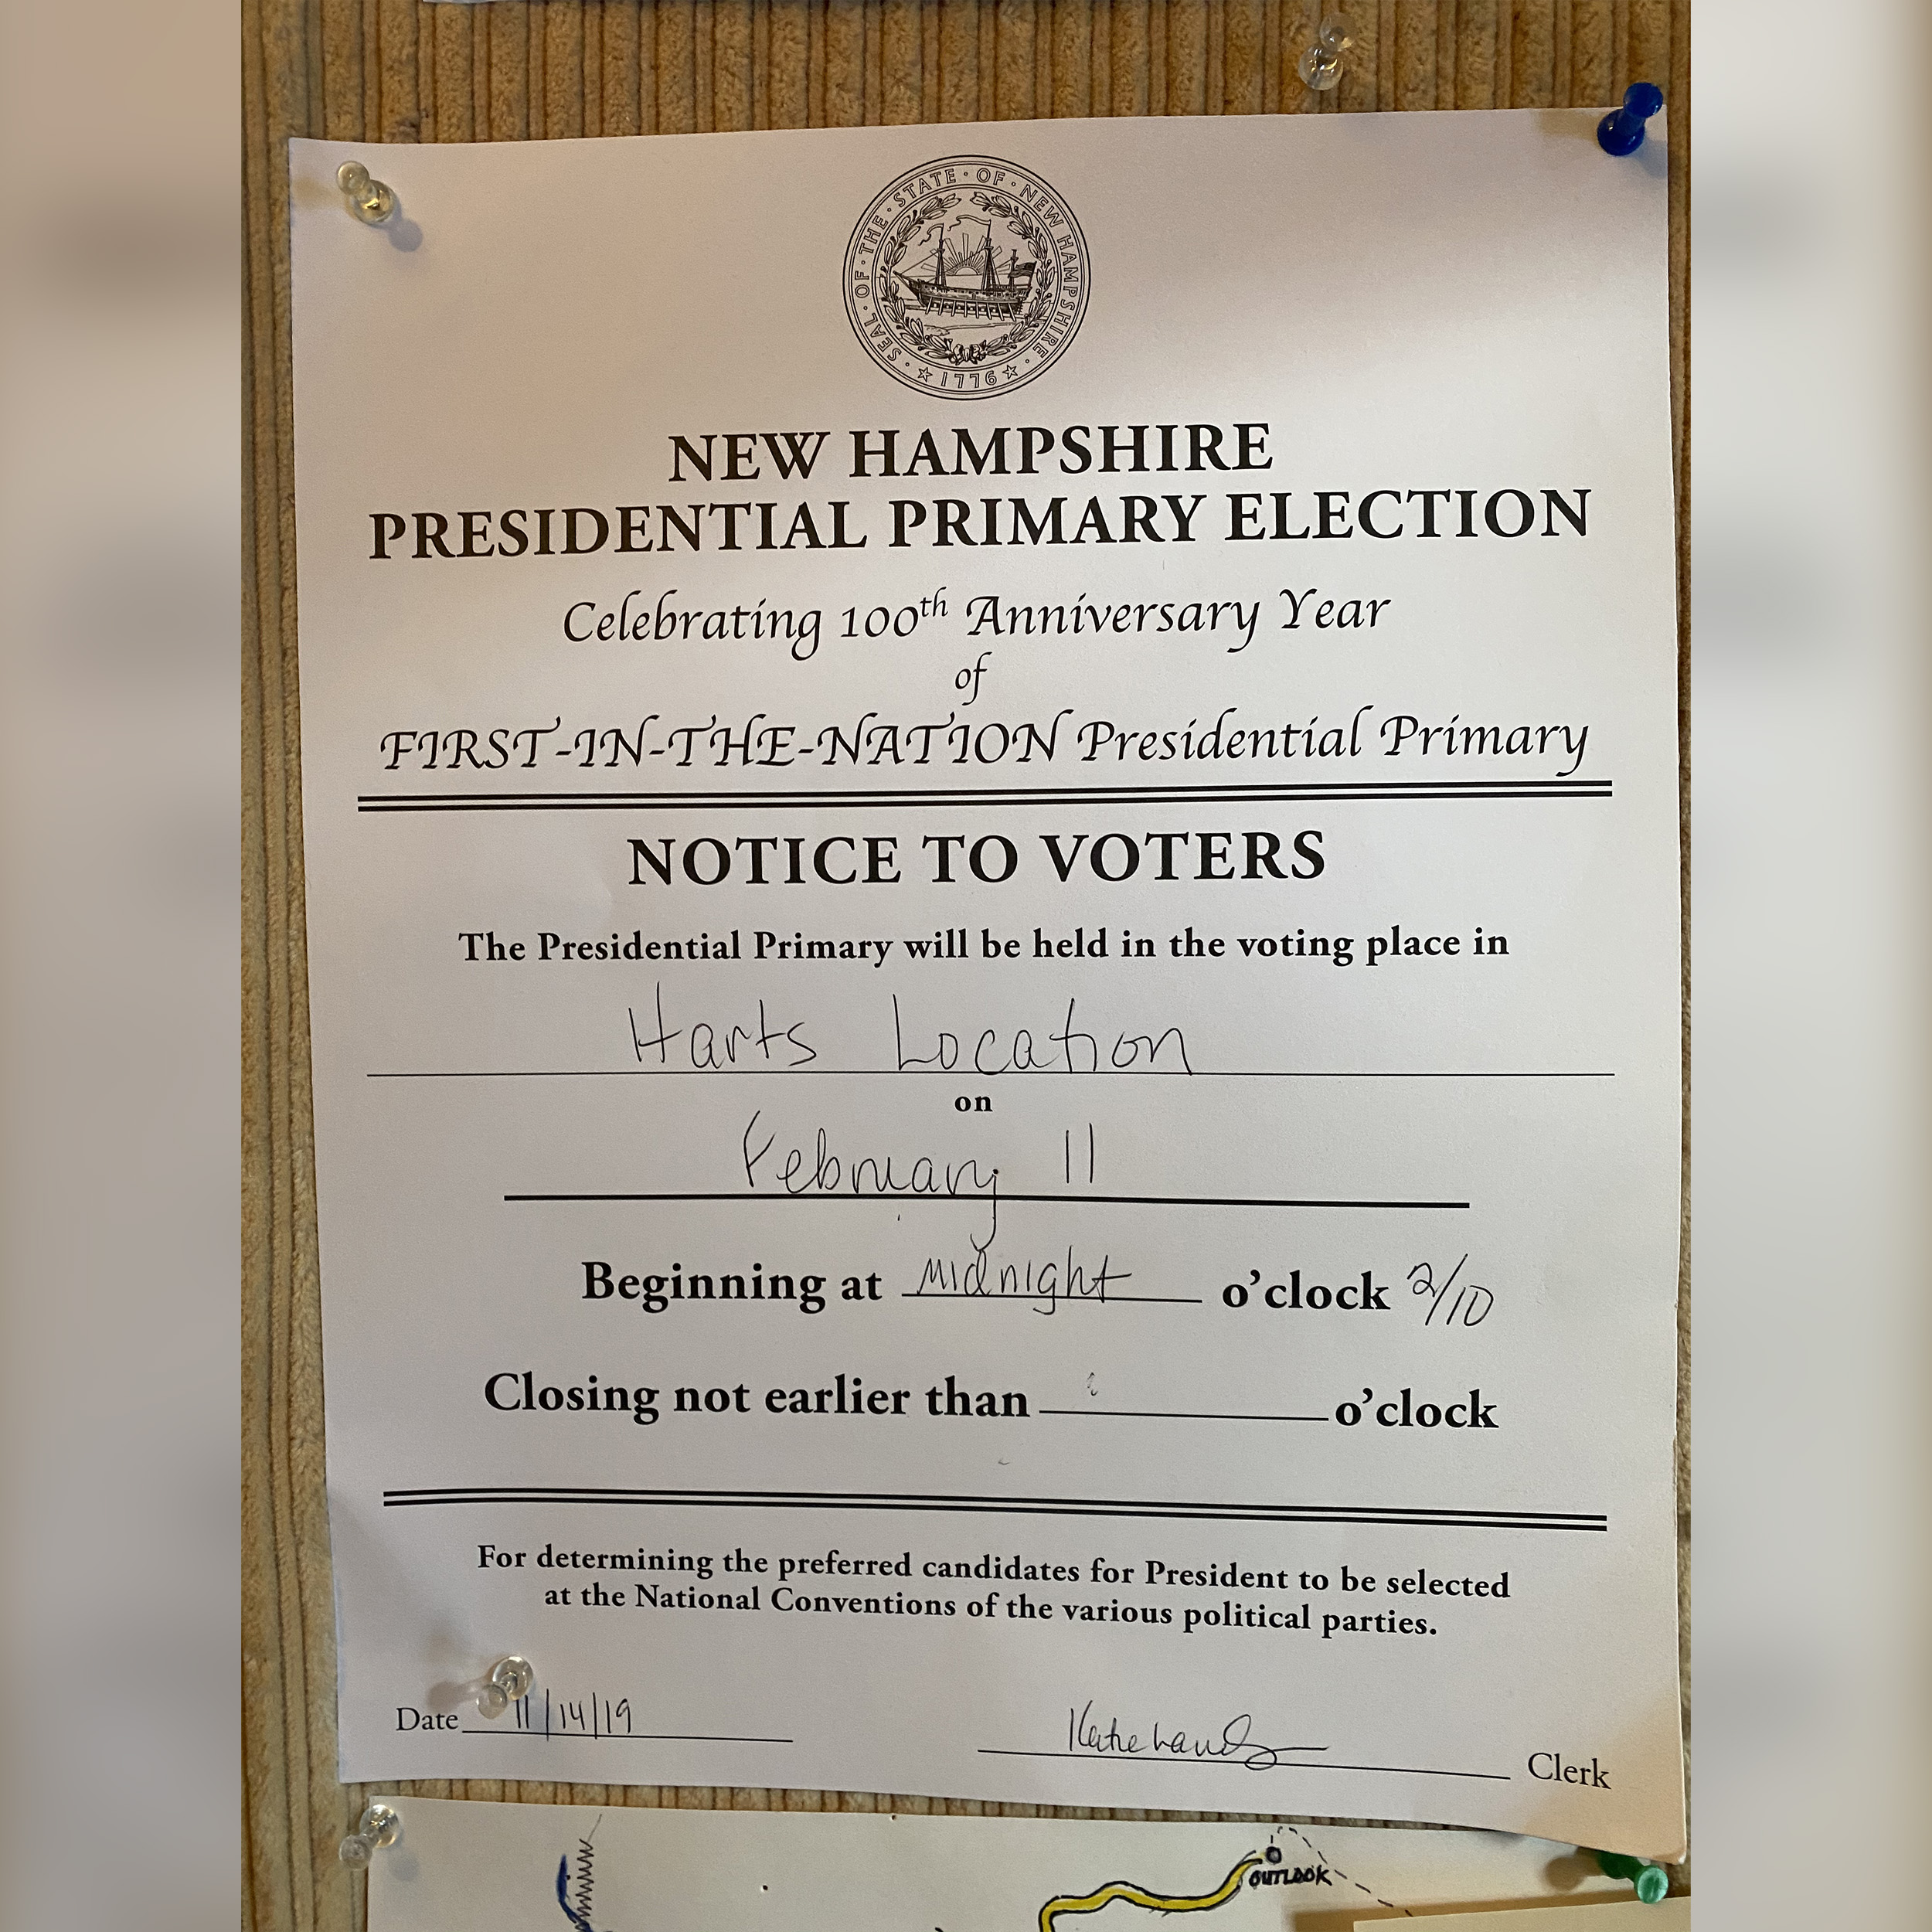 PHOTO: A notice to voters posted in Hart's Location, N.H., announces that voting will begin at midnight on Feb. 11, 2020.